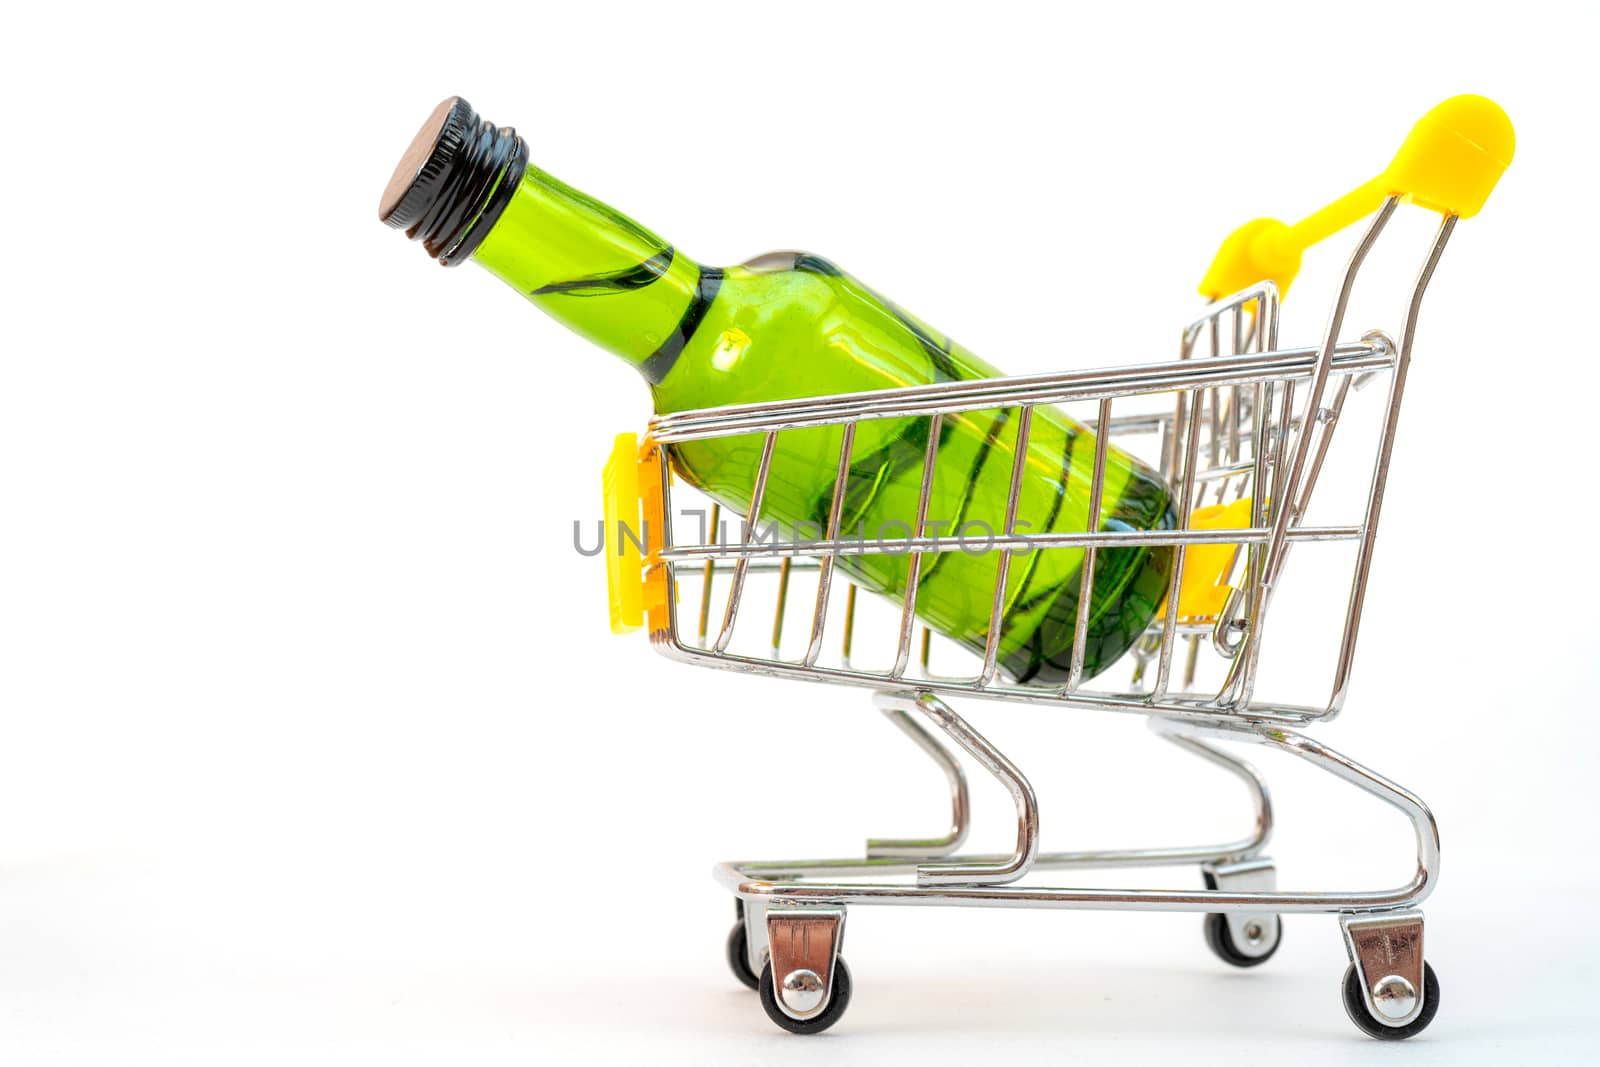 Selling alcohol in a store. Green bottle in a supermarket cart. Drink in a green bottle.